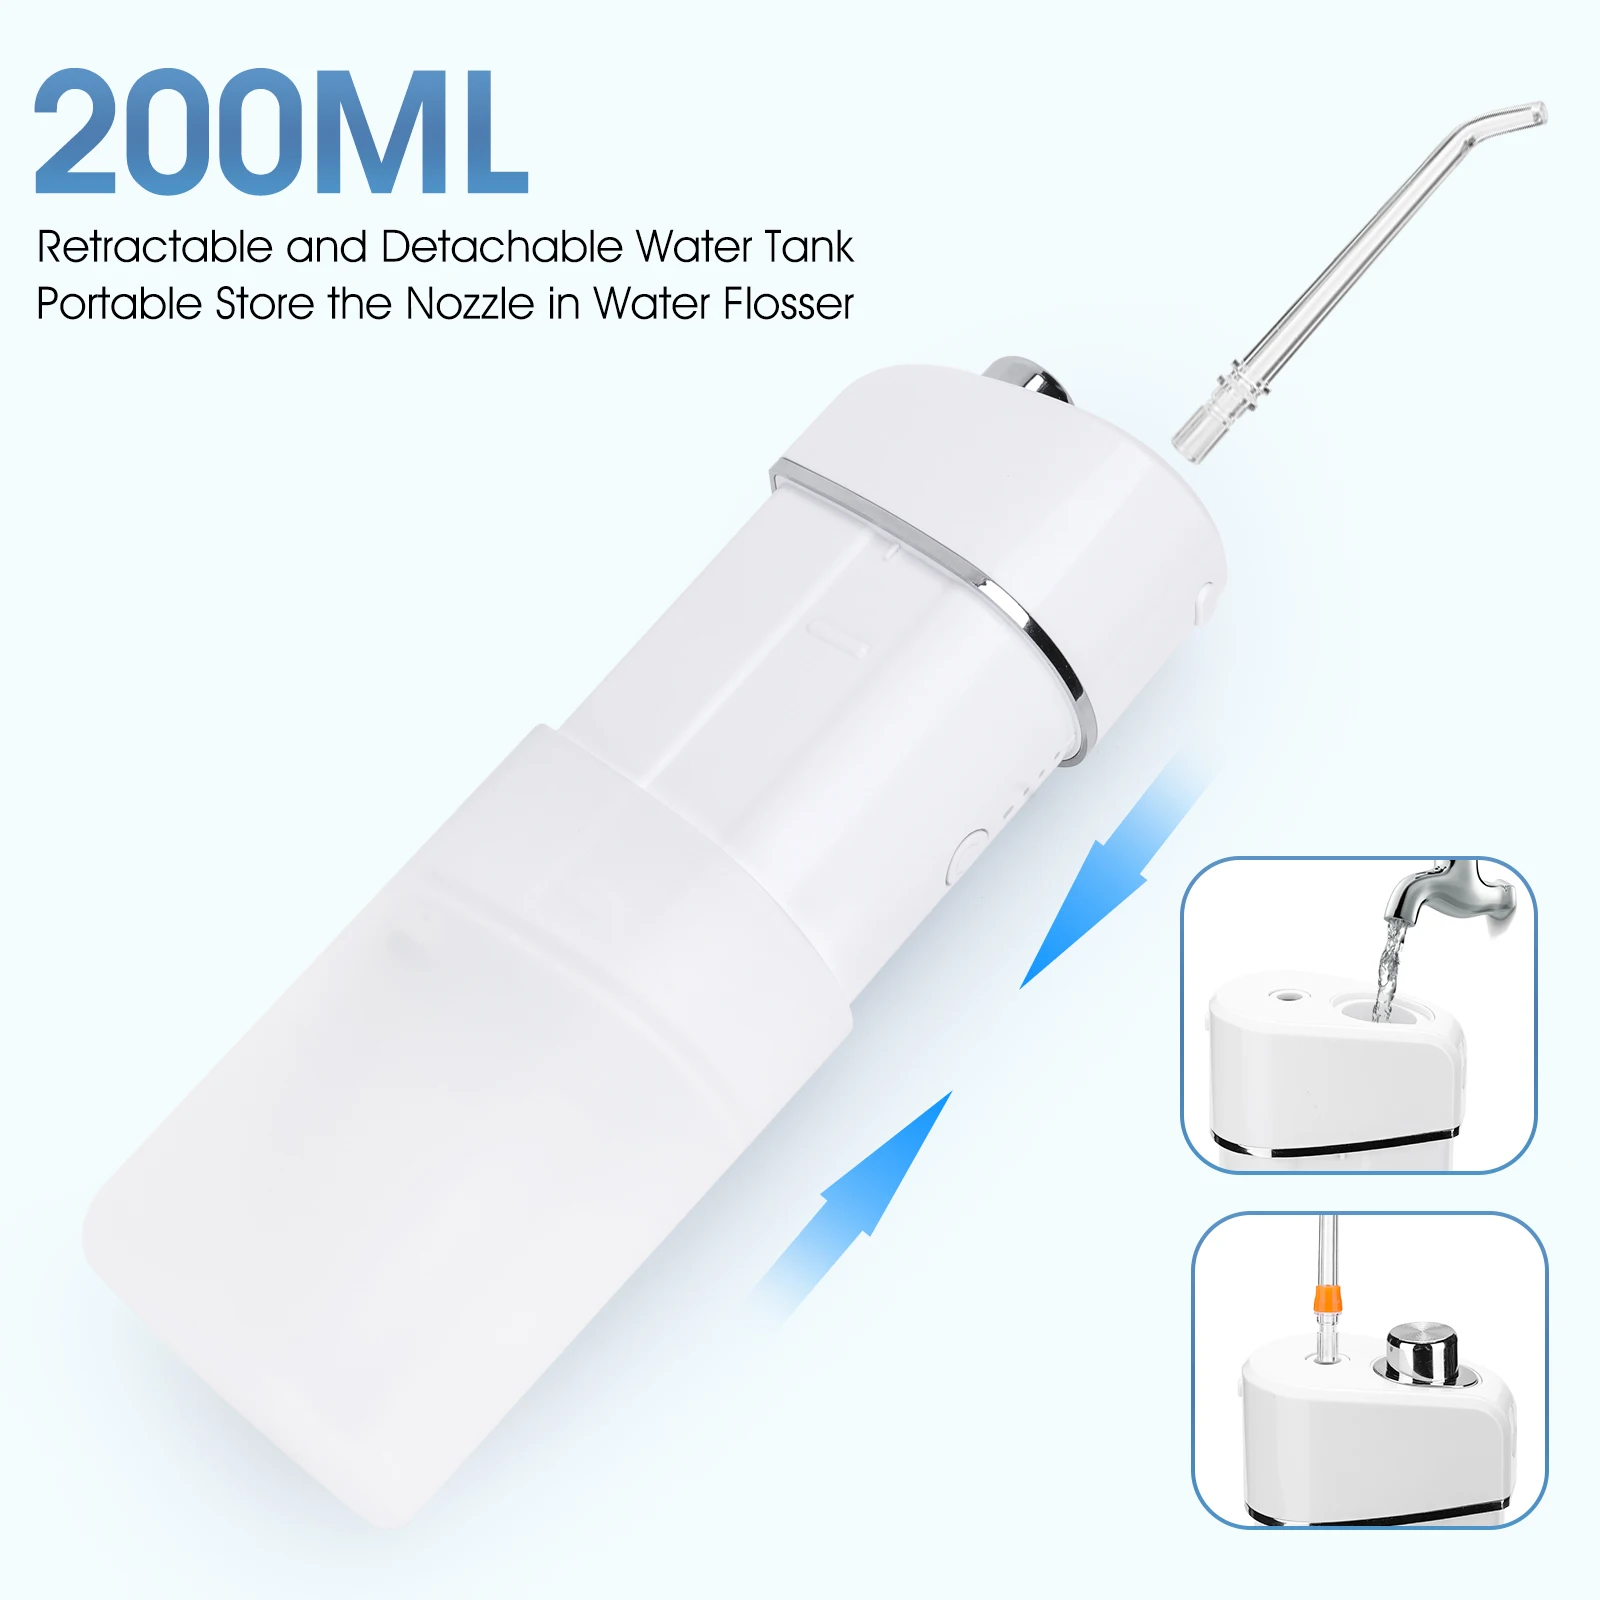 OLOEY New Oral Irrigator Portable Tooth Cleaner Telescoping Water Flosser USB Rechargeable Dental Water Jet 200ML Waterproof